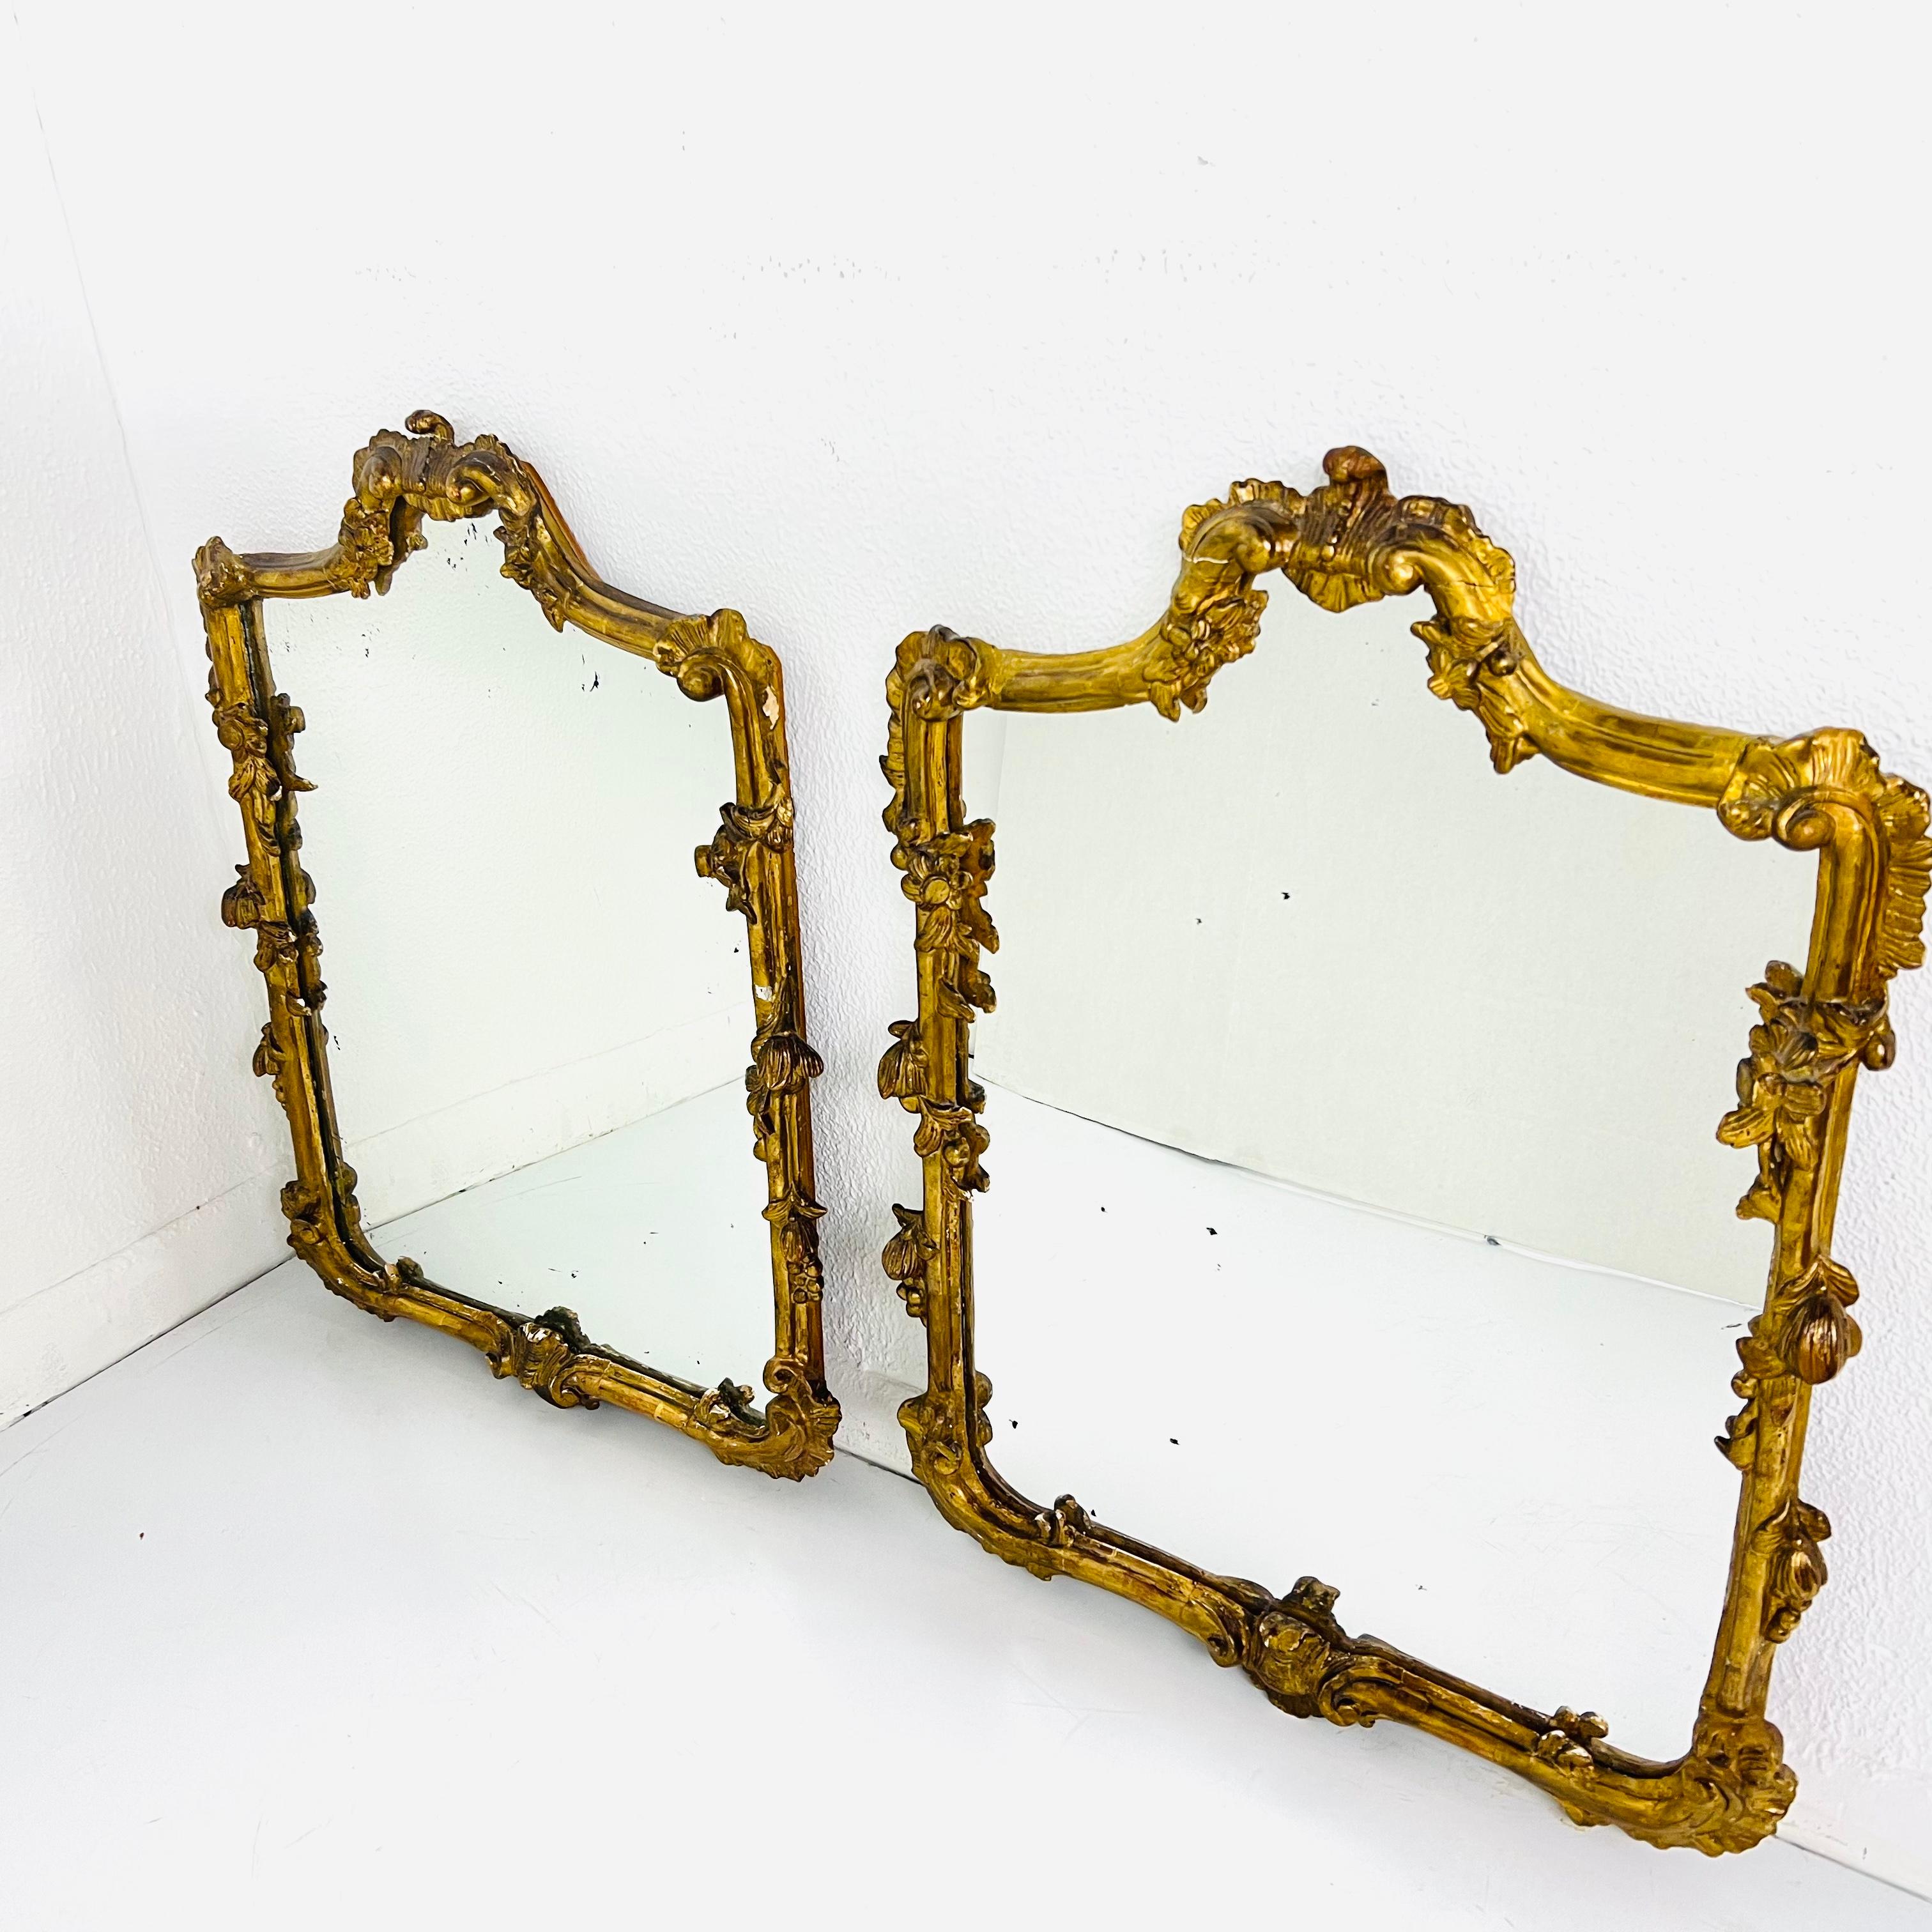 Regency Pair of Ornate Gilded Plaster and Wood Wall Mirrors